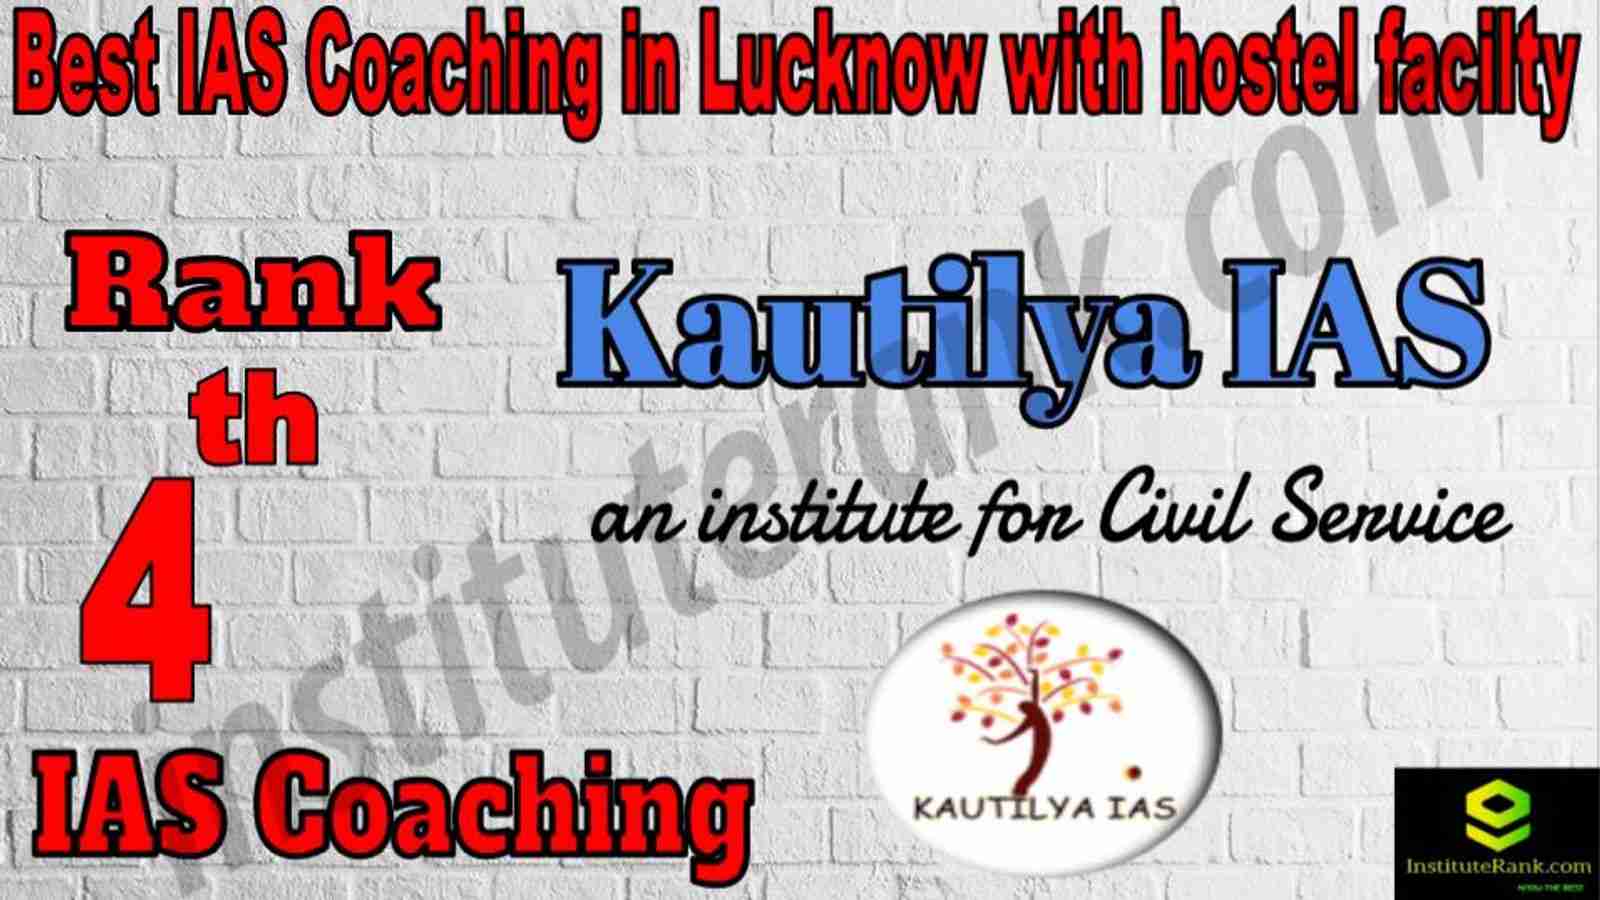 4th Best IAS Coaching in Lucknow With Hostel facility